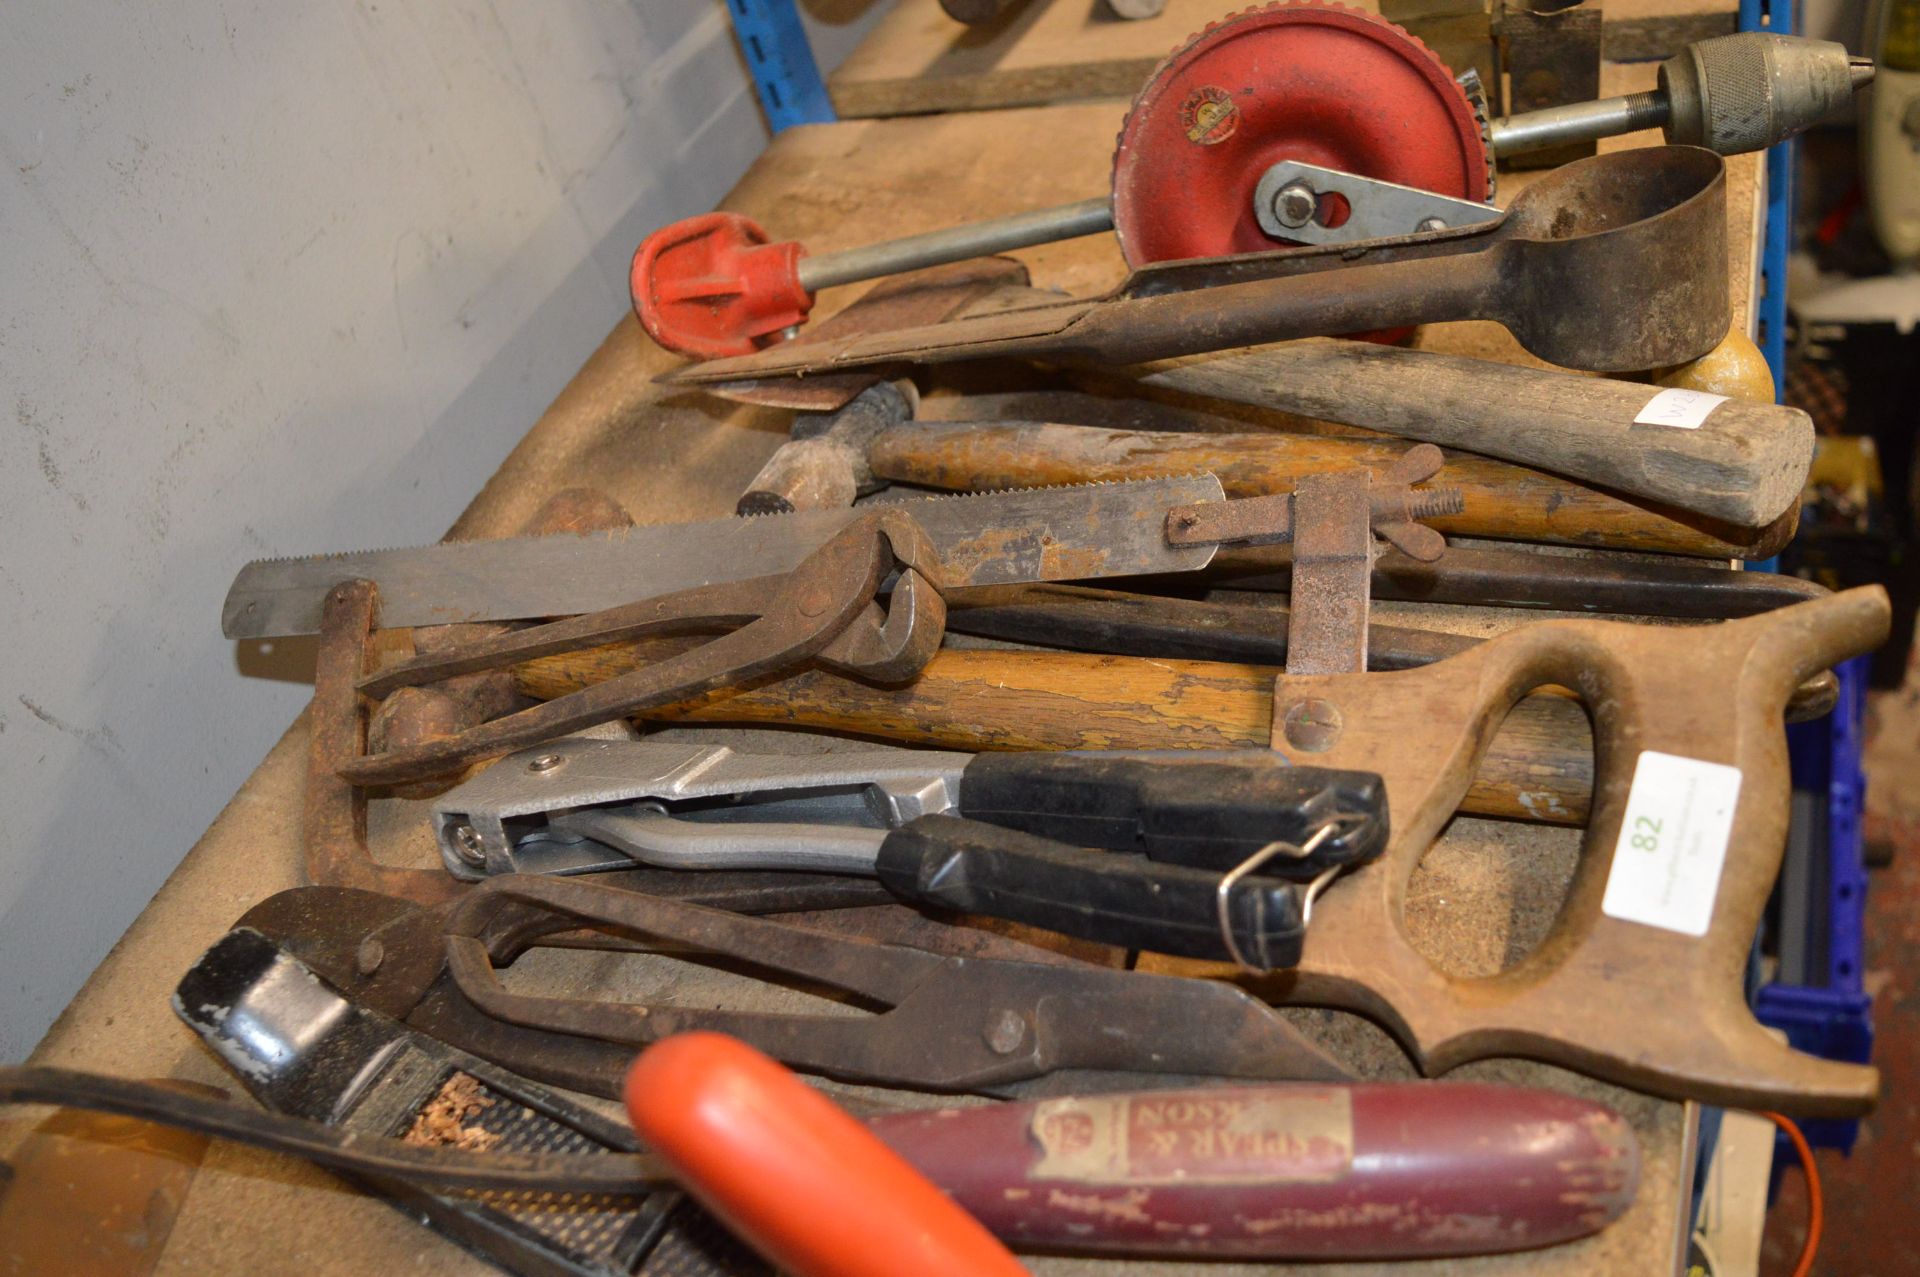 Mixed Lot Including Sheers, Saws, Screwdriver, etc - Image 2 of 2